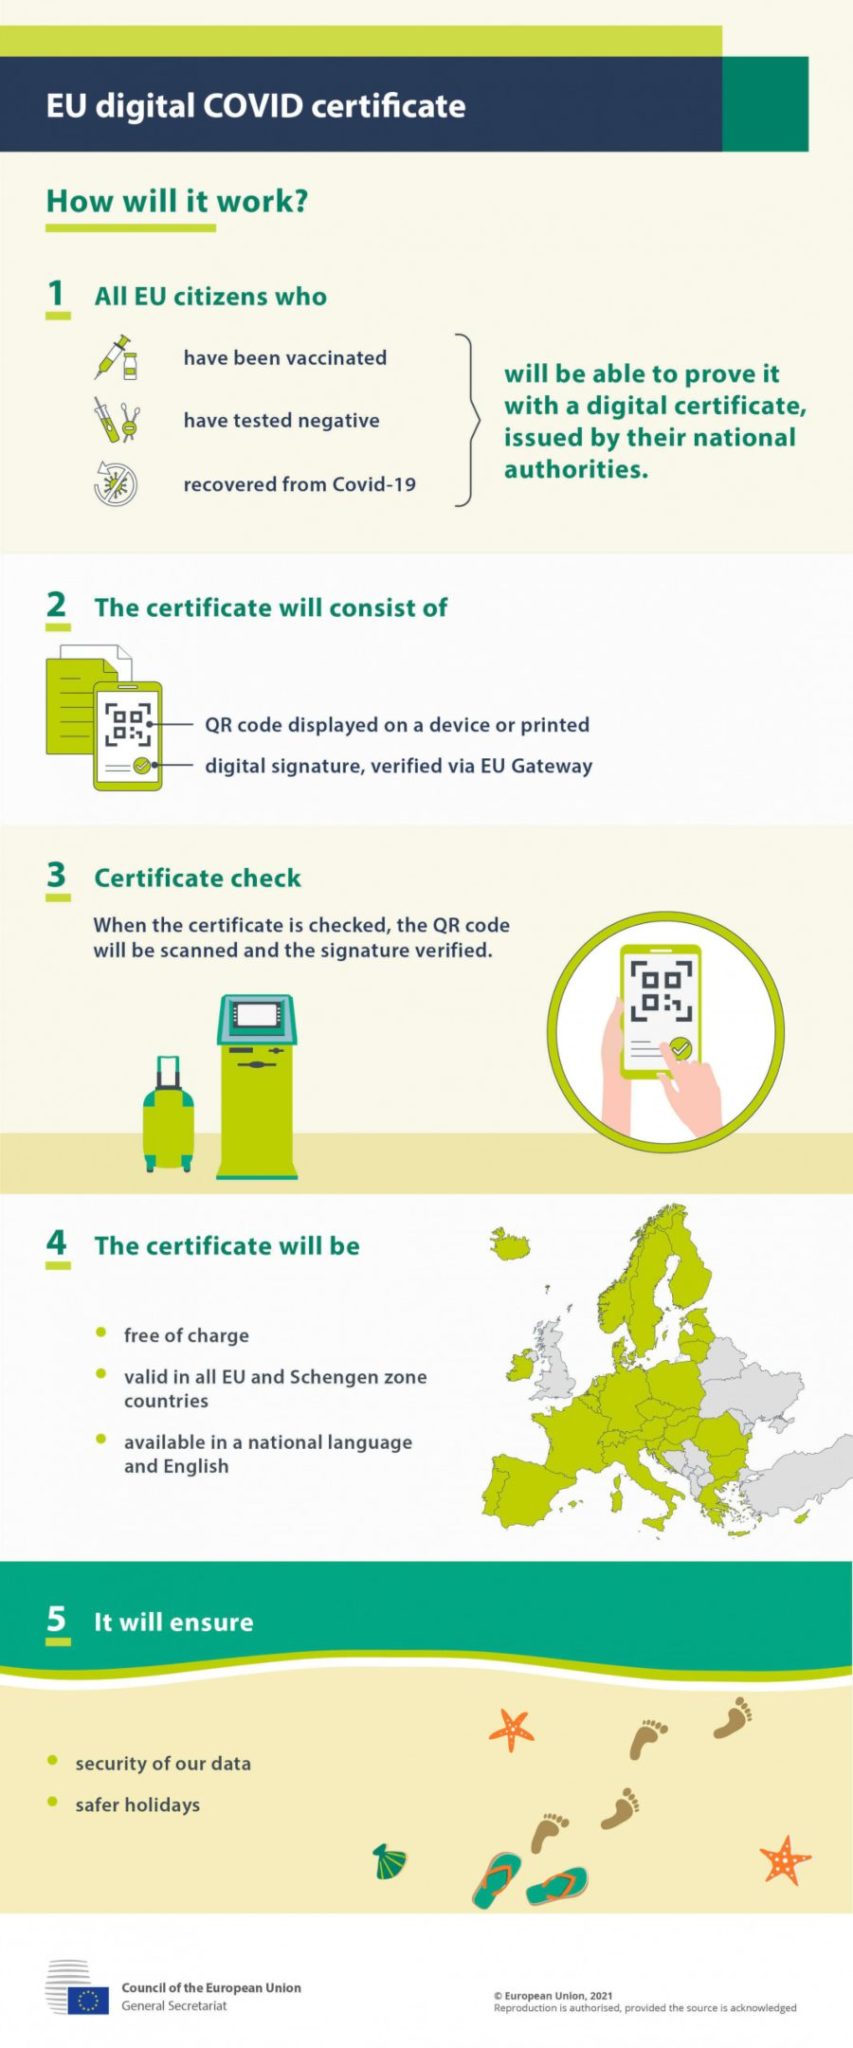 The EU digital COVID certificate will help Europe reopen tourism.